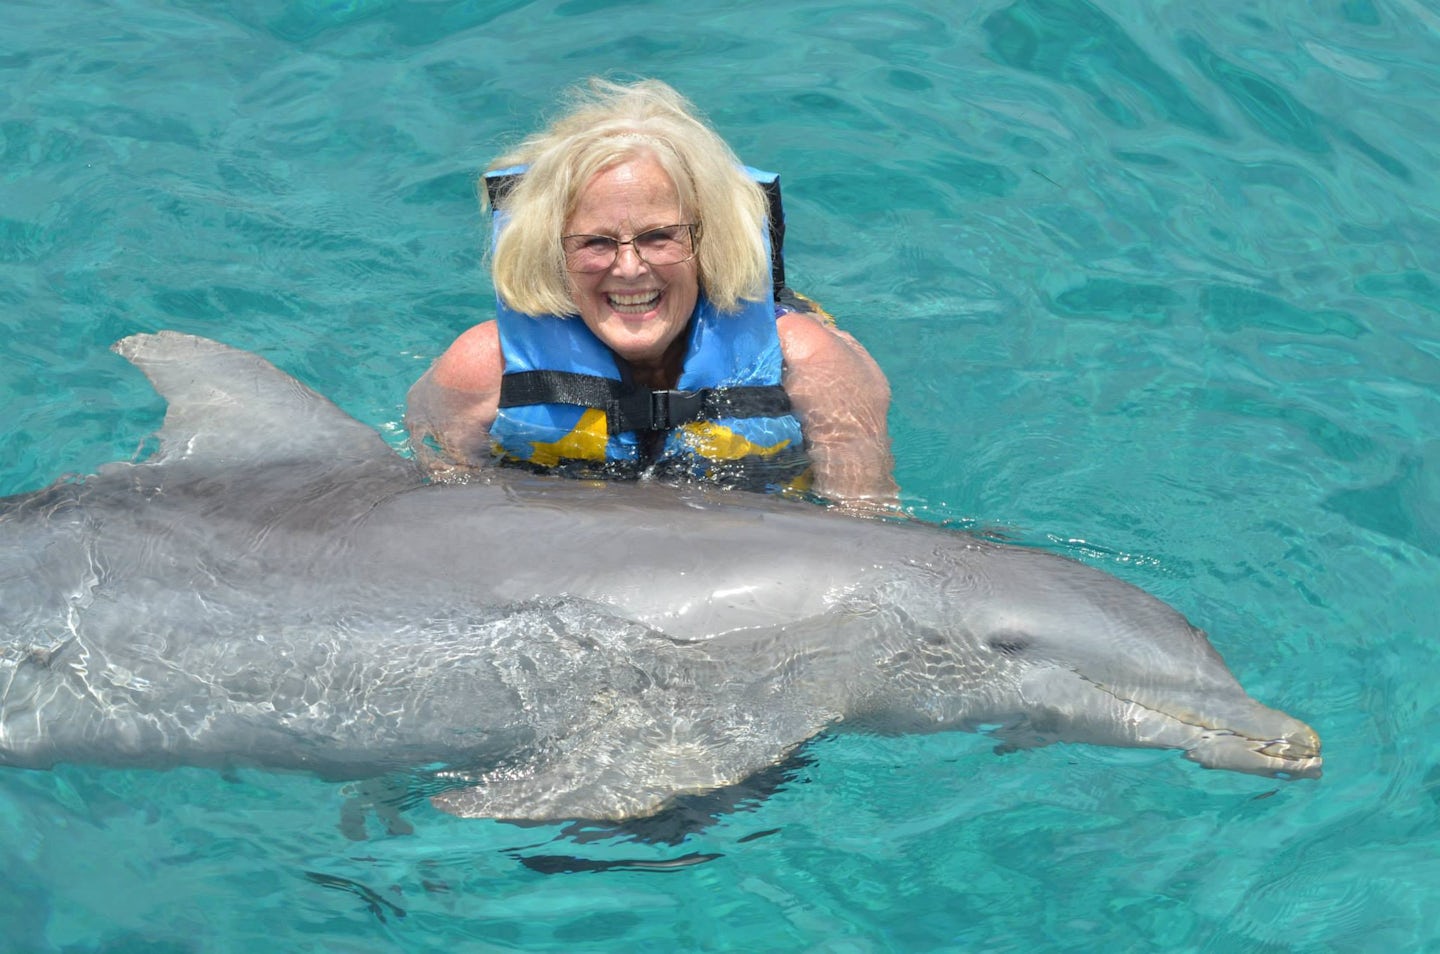 Mom swimming with the dolphins in Cozumel, Mexico at Chankanaab Adventure B